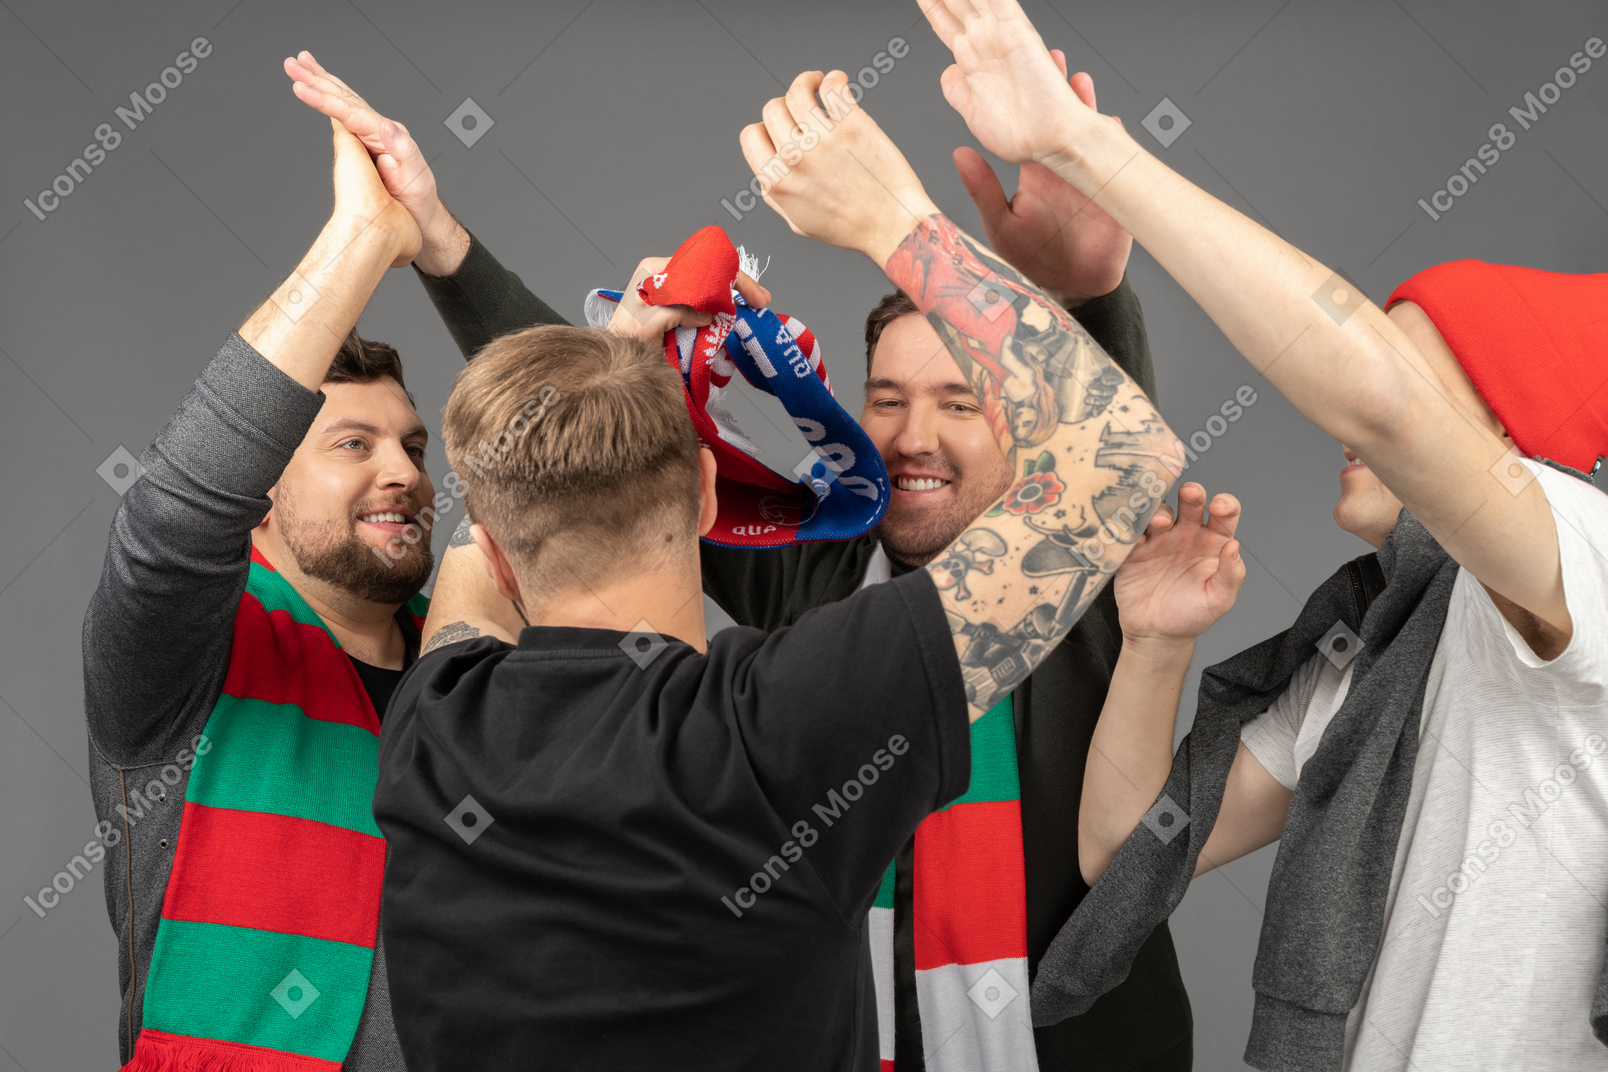 Close-up of four happy male football fans giving high five